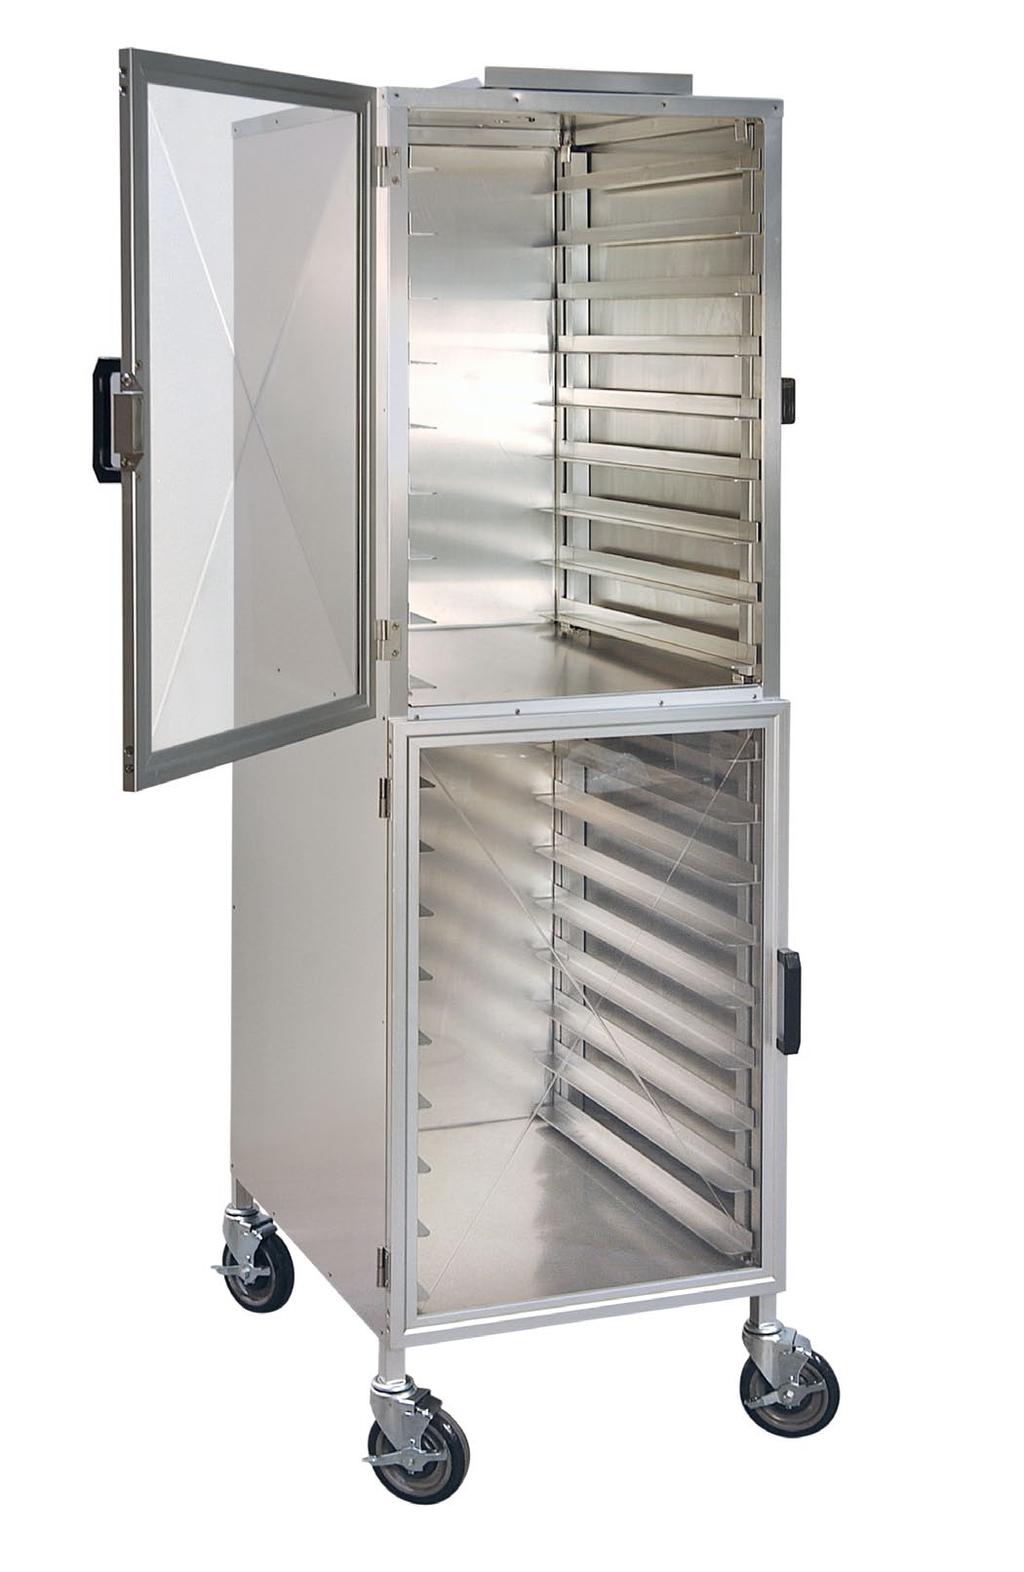 ER-18 Enclosed Rack For Display JOB ITEM # QTY # MODEL NUMBER ER-18-L ER-18-R ER-18-L Piper s Enclosed Rack offers a cooling rack for product coming out of the oven while providing merchandising to